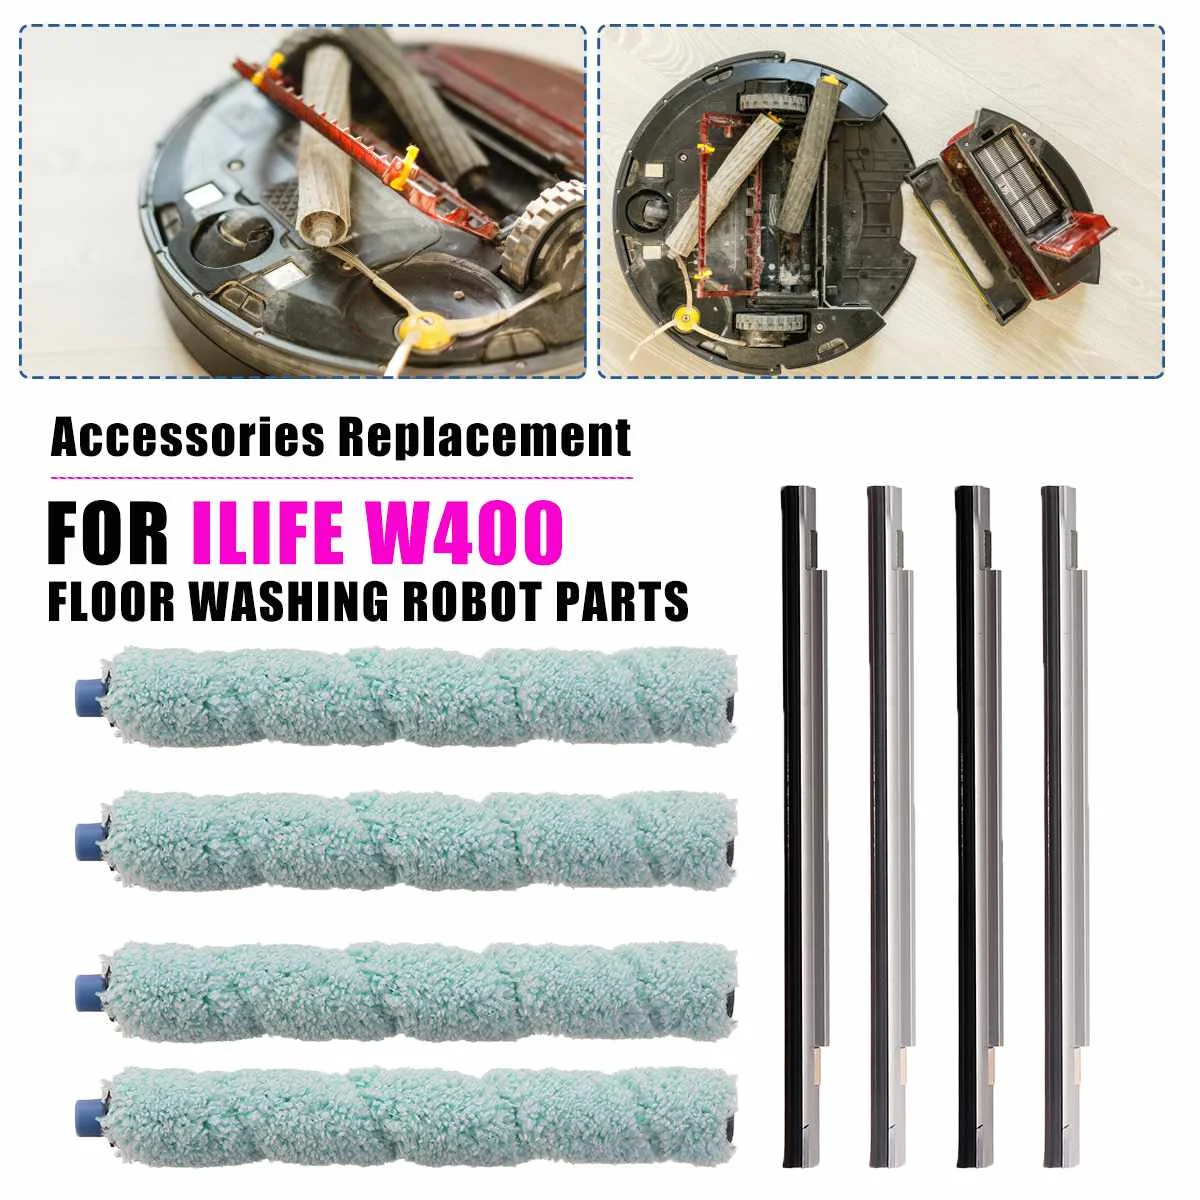 8PCS Floor Washing Robotic Cleaner Main Brush & Scraper Replacement for ilife W400 Floor Washing Robot Parts Accessories